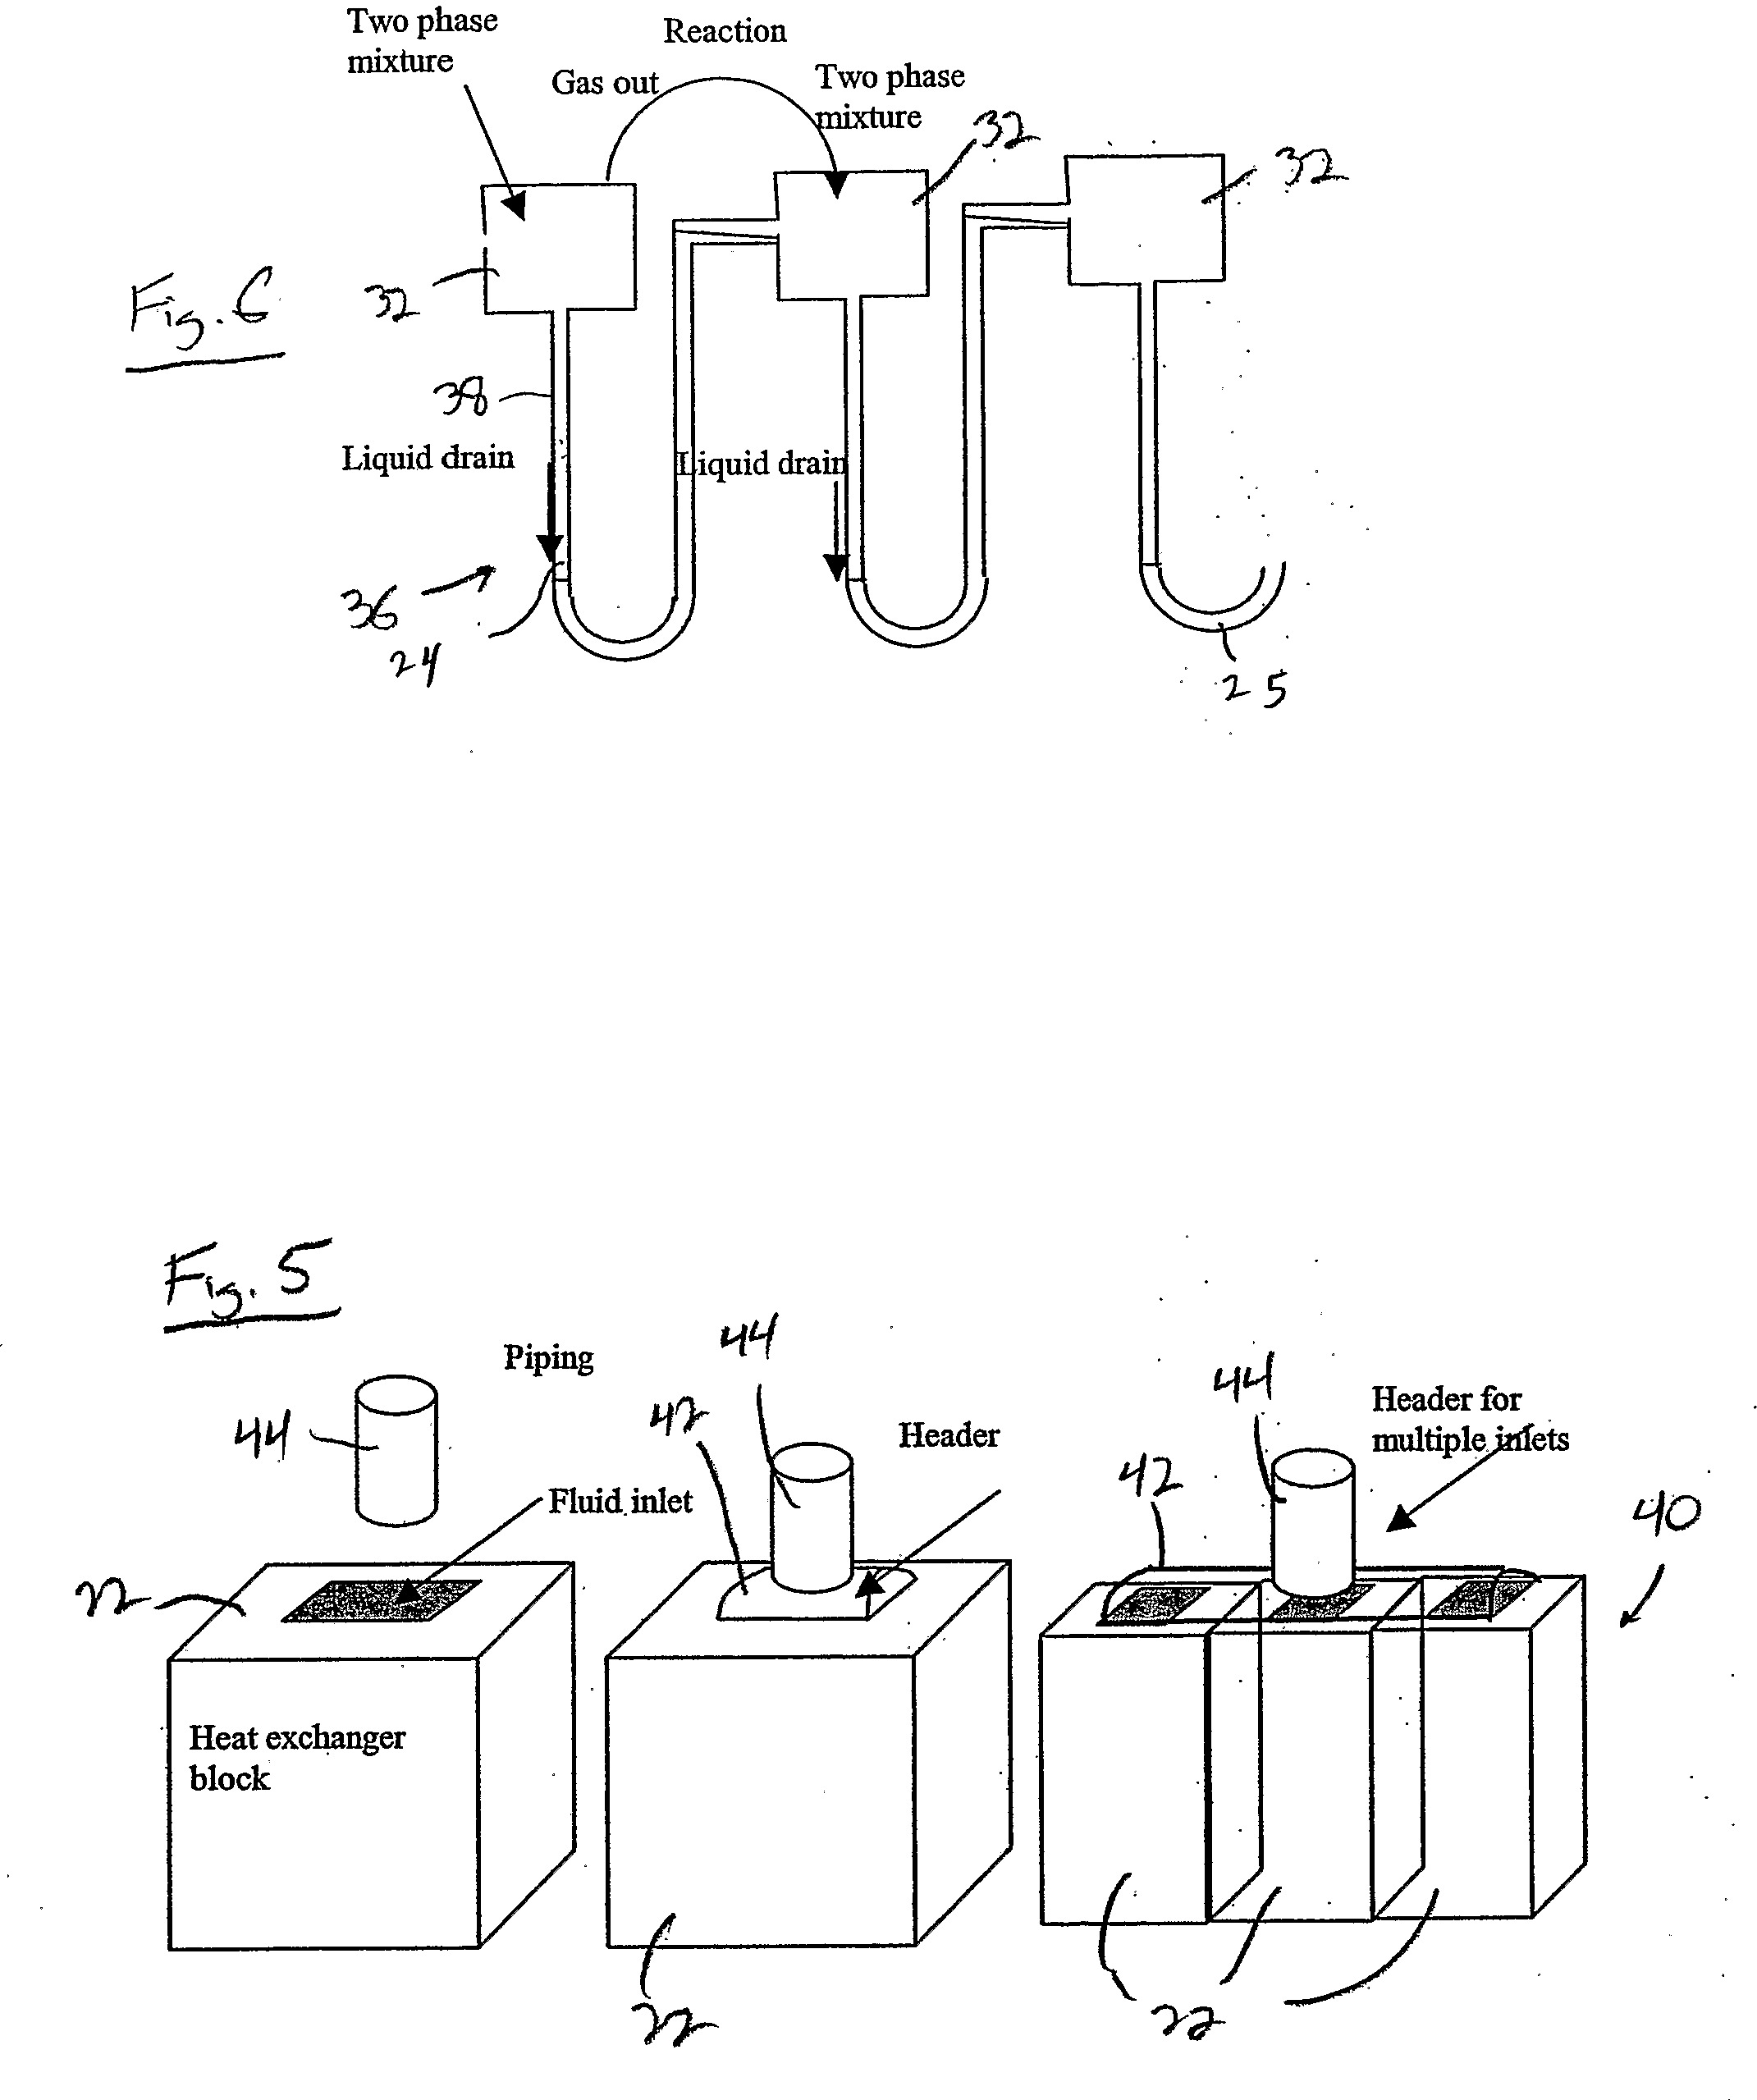 Multiple Reactor Chemical Production System